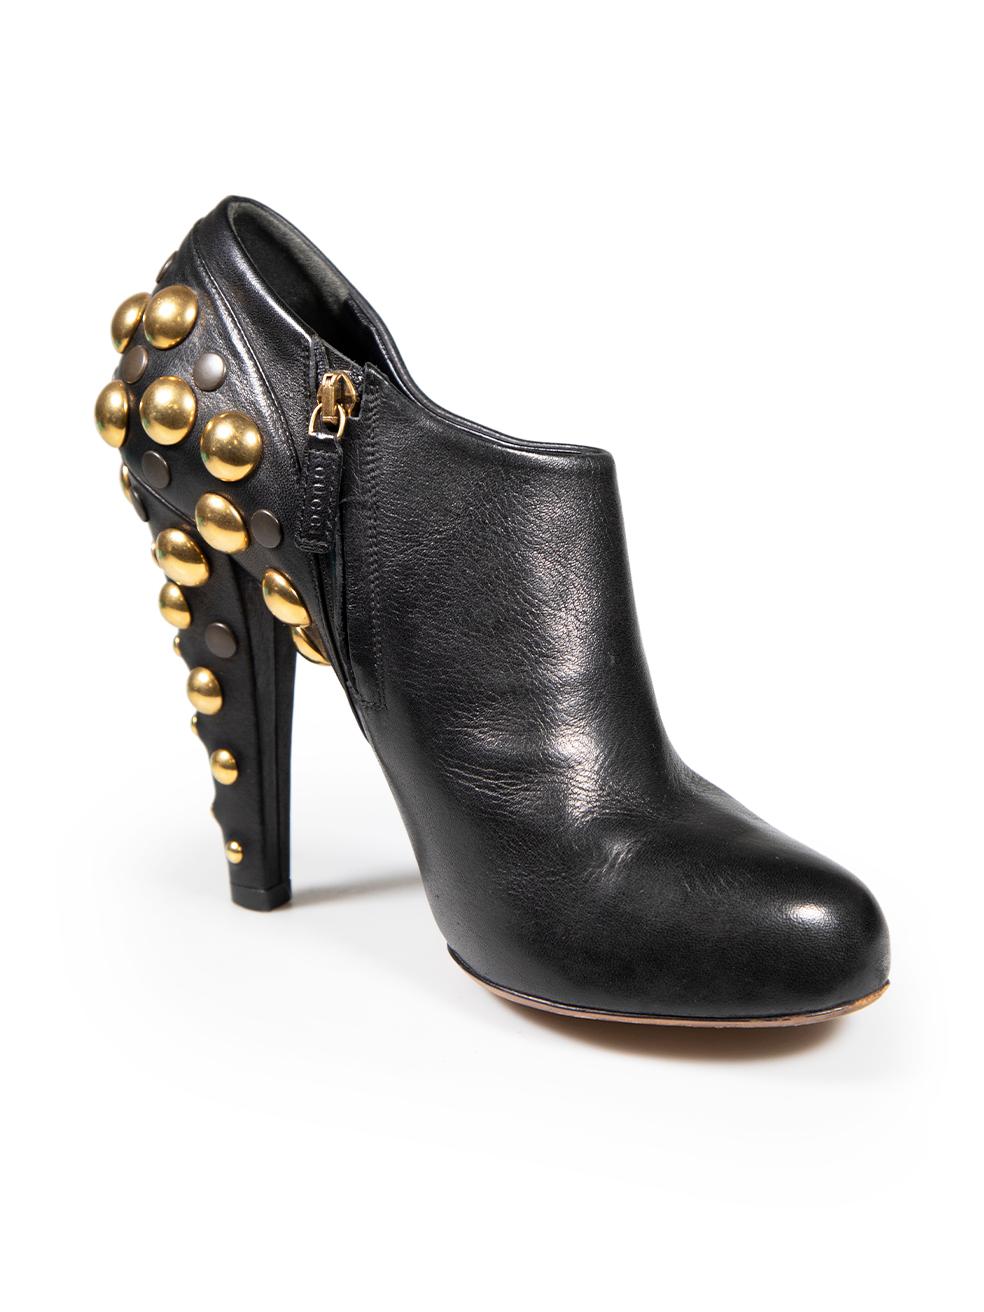 CONDITION is Very good. Hardly any visible wear to heeled ankle boots is evident, the soles have normal abrasion on this used Gucci designer resale item.
 
 
 
 Details
 
 
 Black
 
 Leather
 
 Ankle boots
 
 High heeled
 
 Almond toe
 
 Gold and